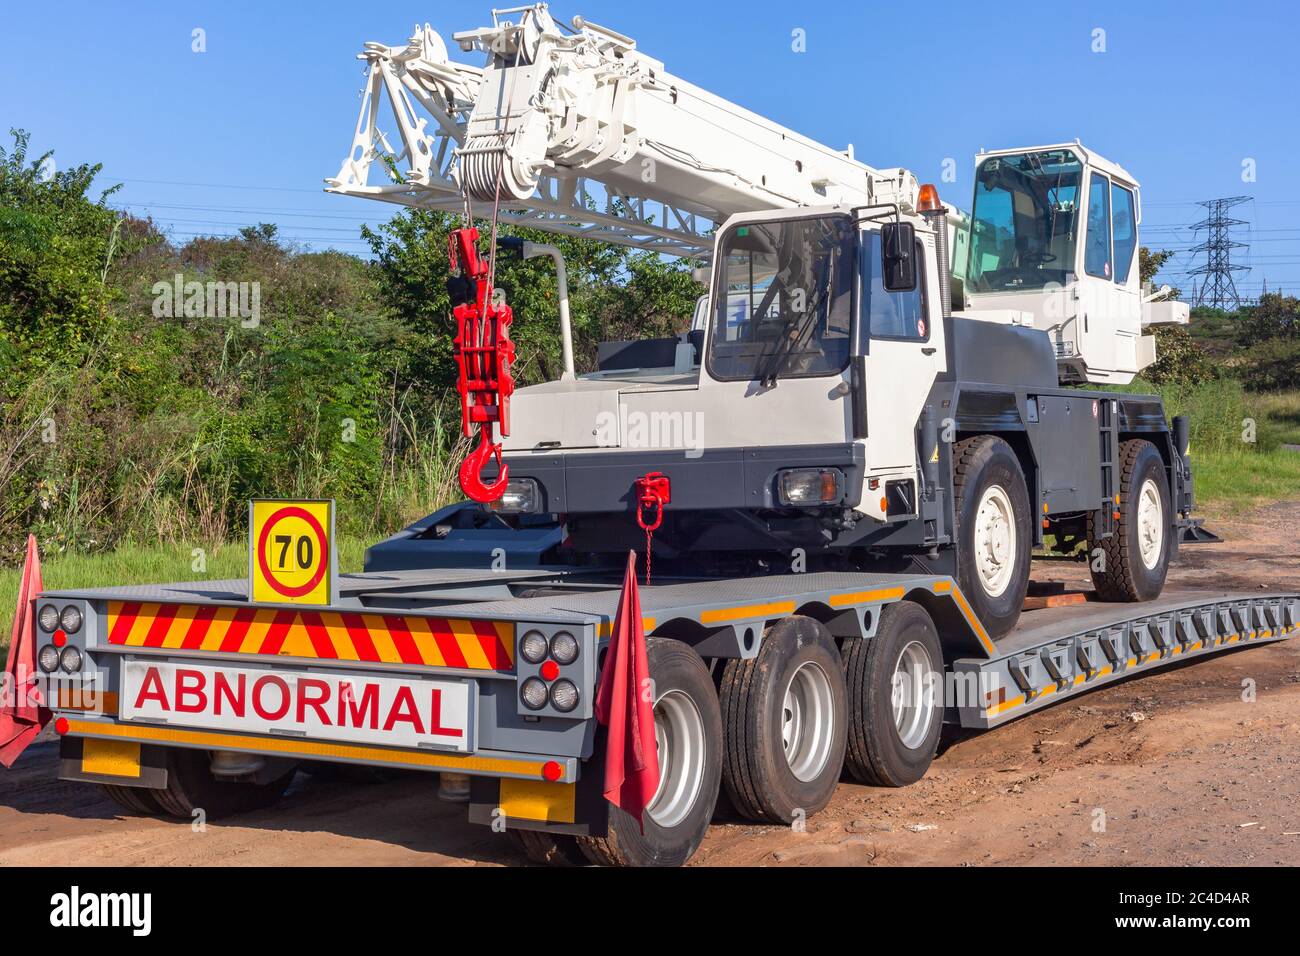 Mobile white crane vehicle for industrial rigging lifting on abnormal  trailer parked roadside closeup photo in blue sky Stock Photo - Alamy